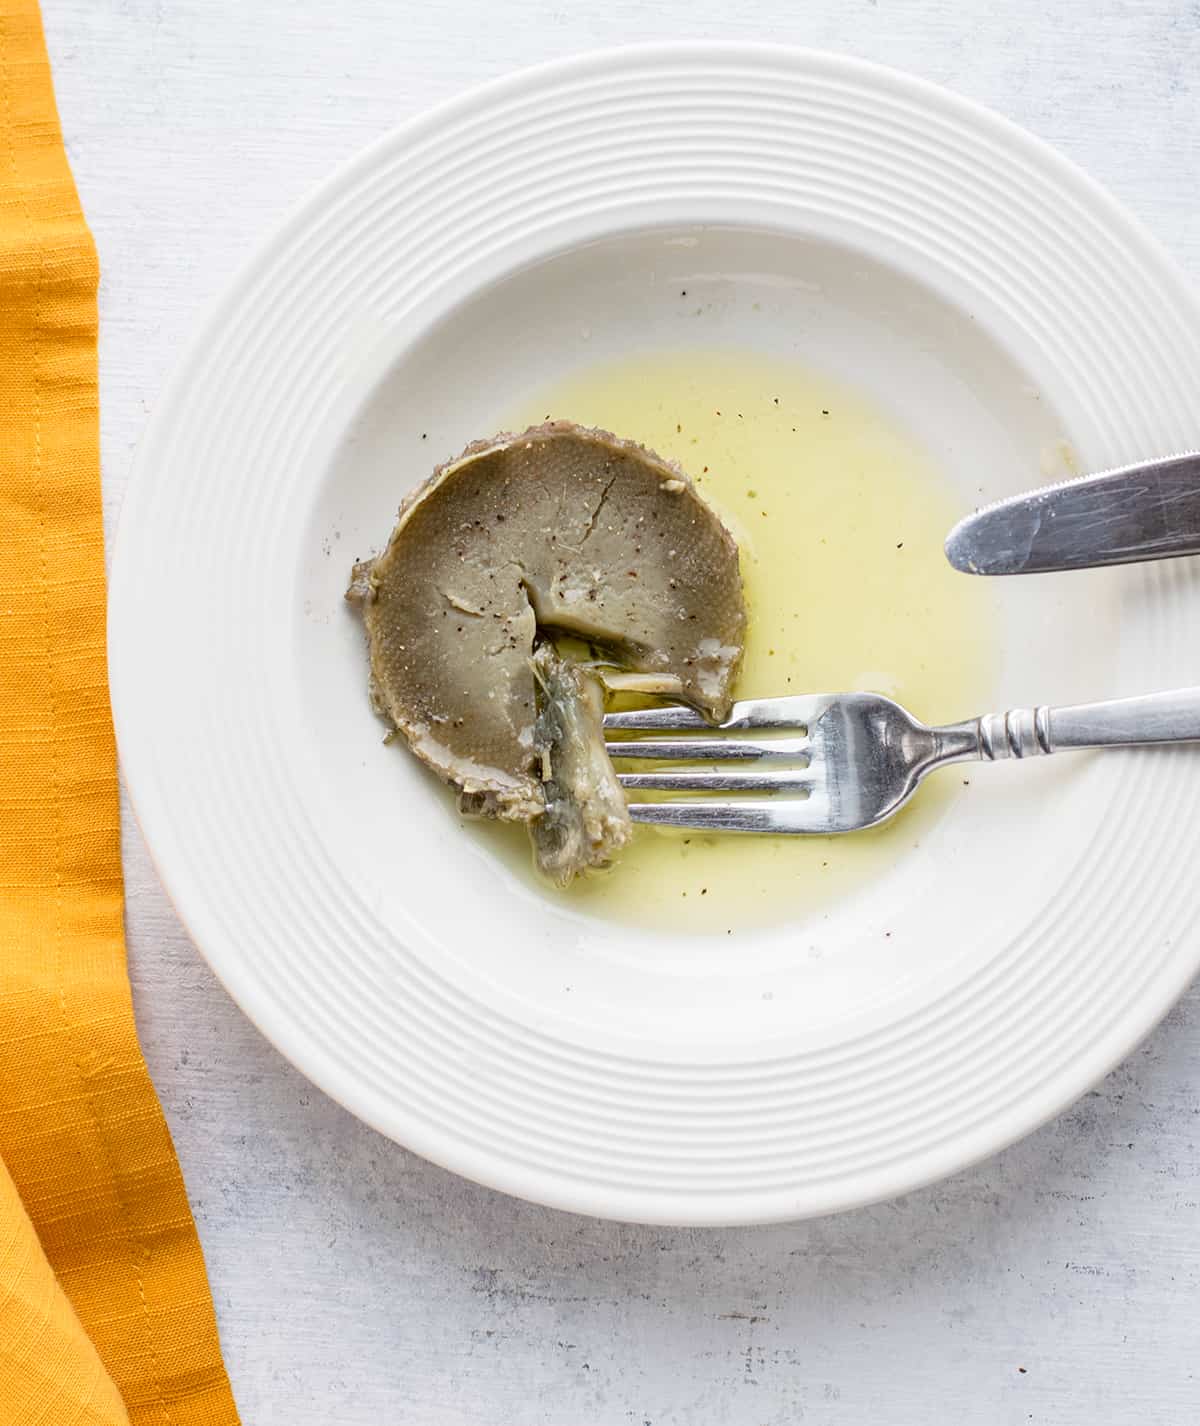 cooked artichoke heart in oil with a forkful of the heart